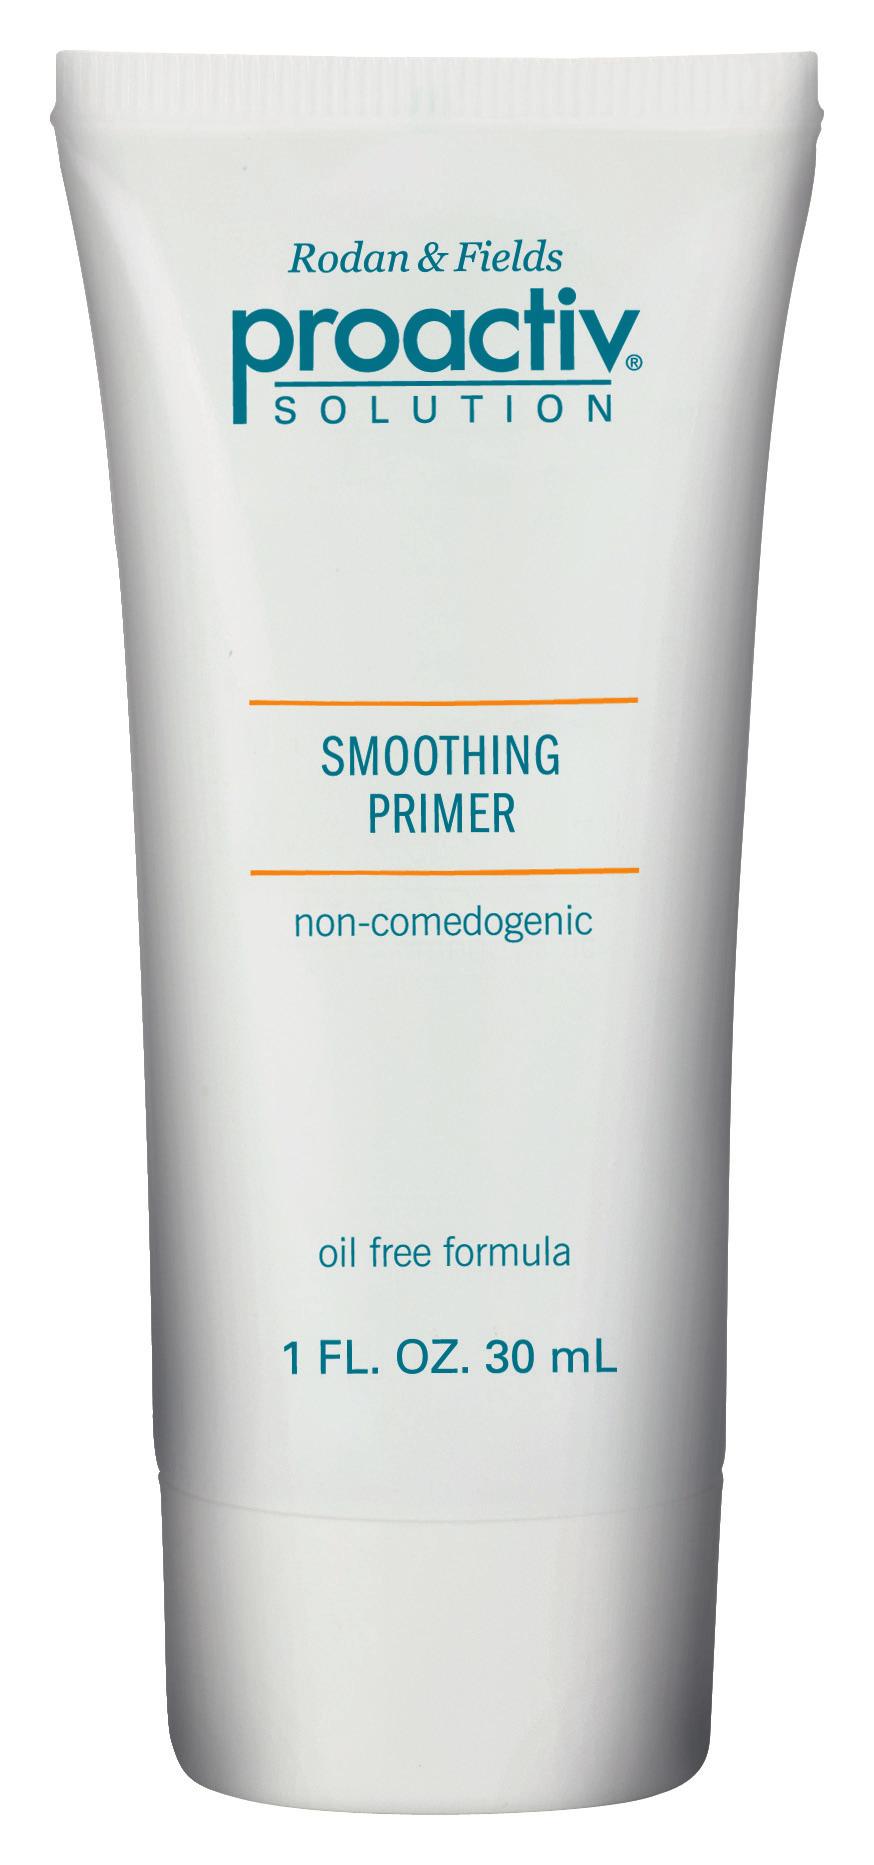 With our Smoothing Primer, specifically designed to reduce excess oil and control shine all day.